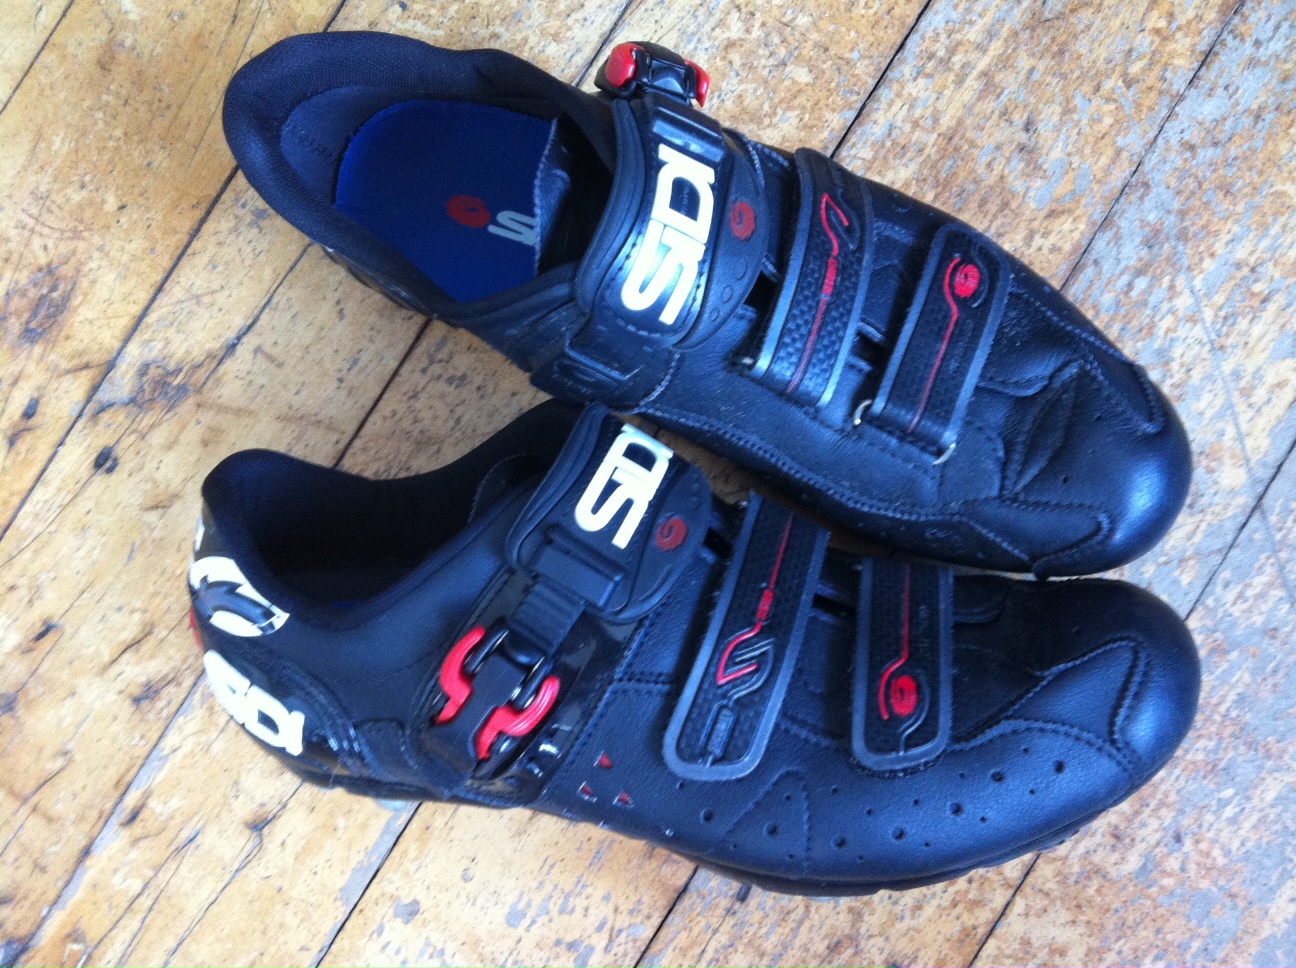 clip in cycling shoes